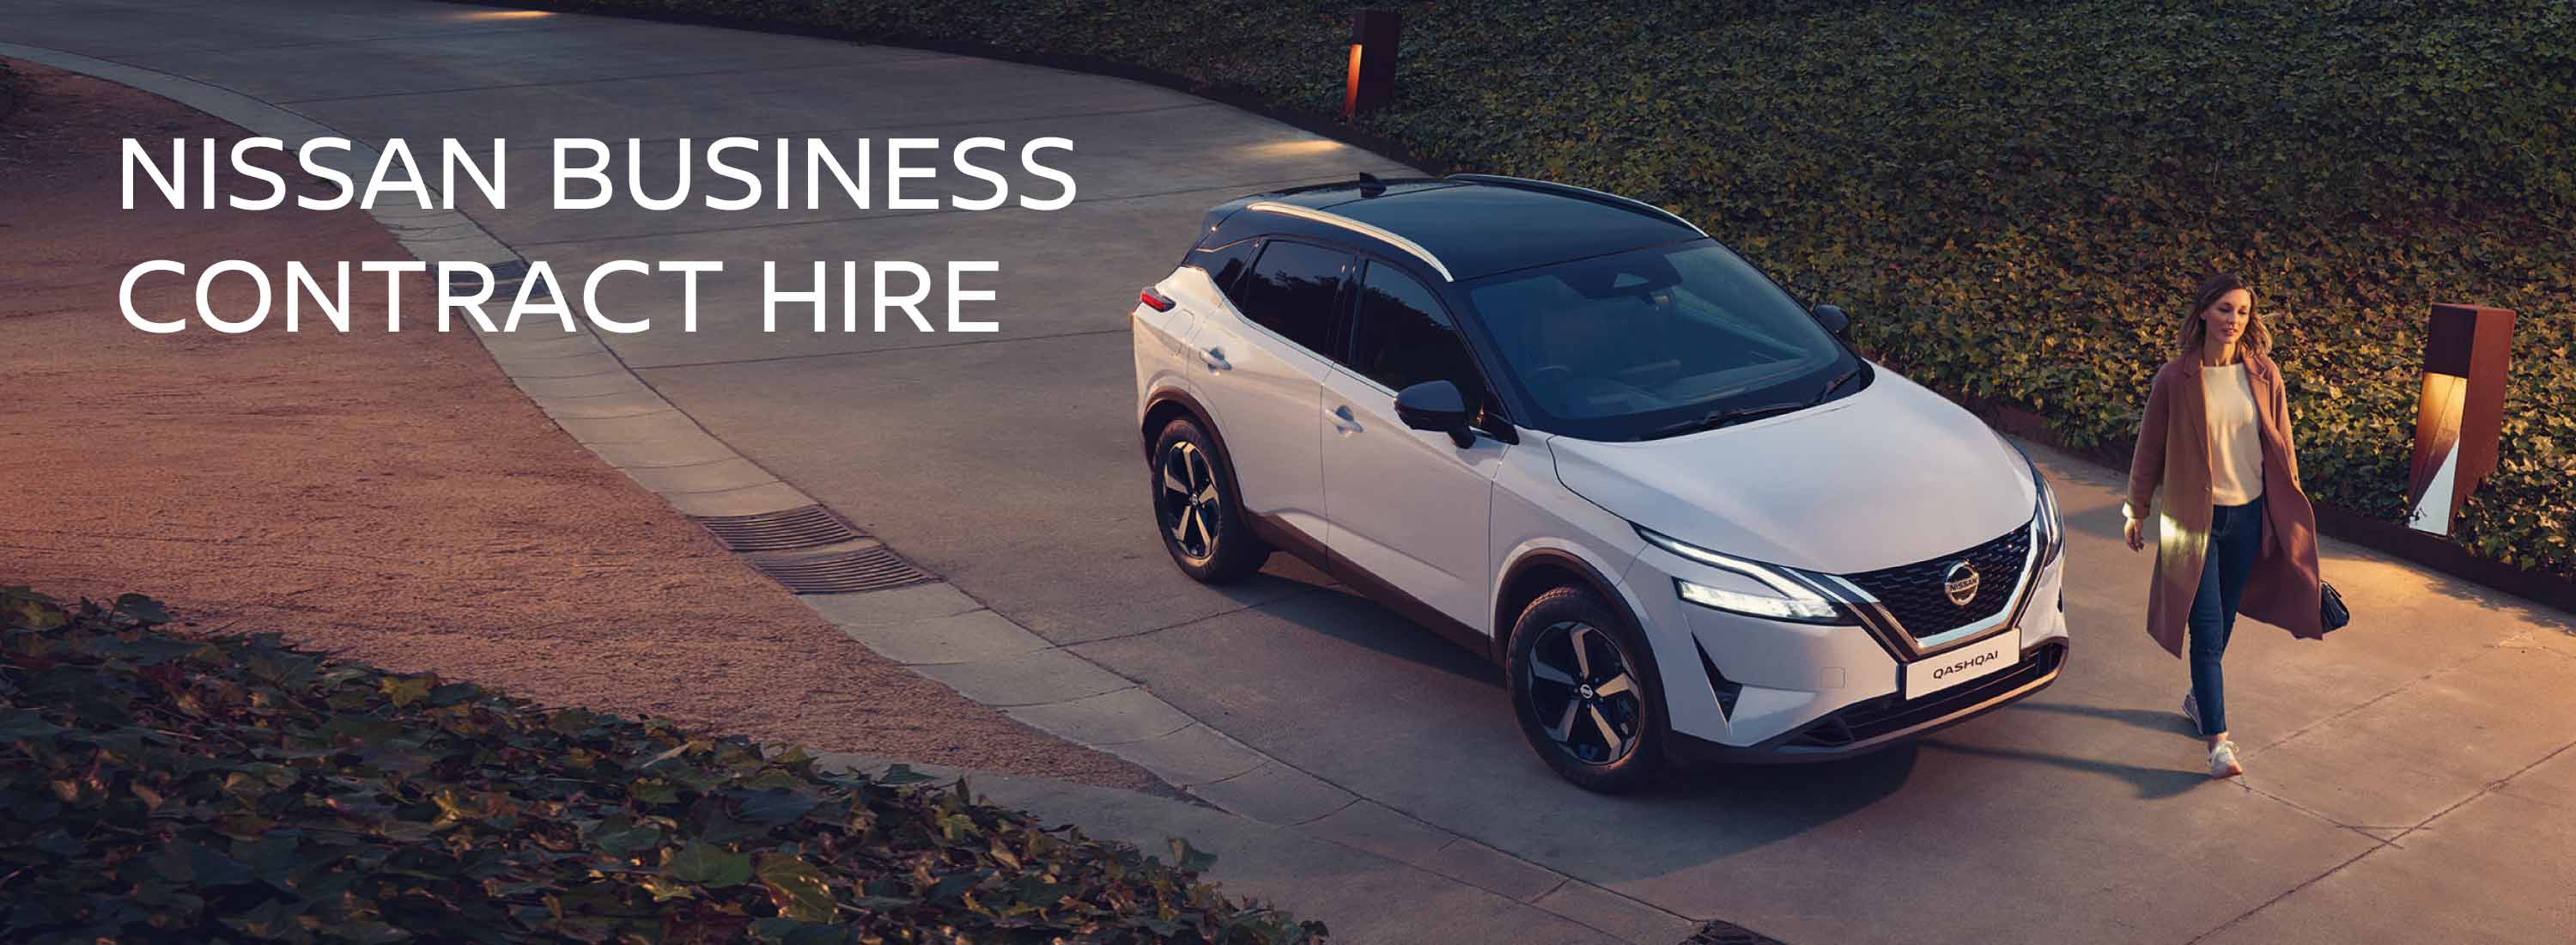 Nissan Business Contract Hire